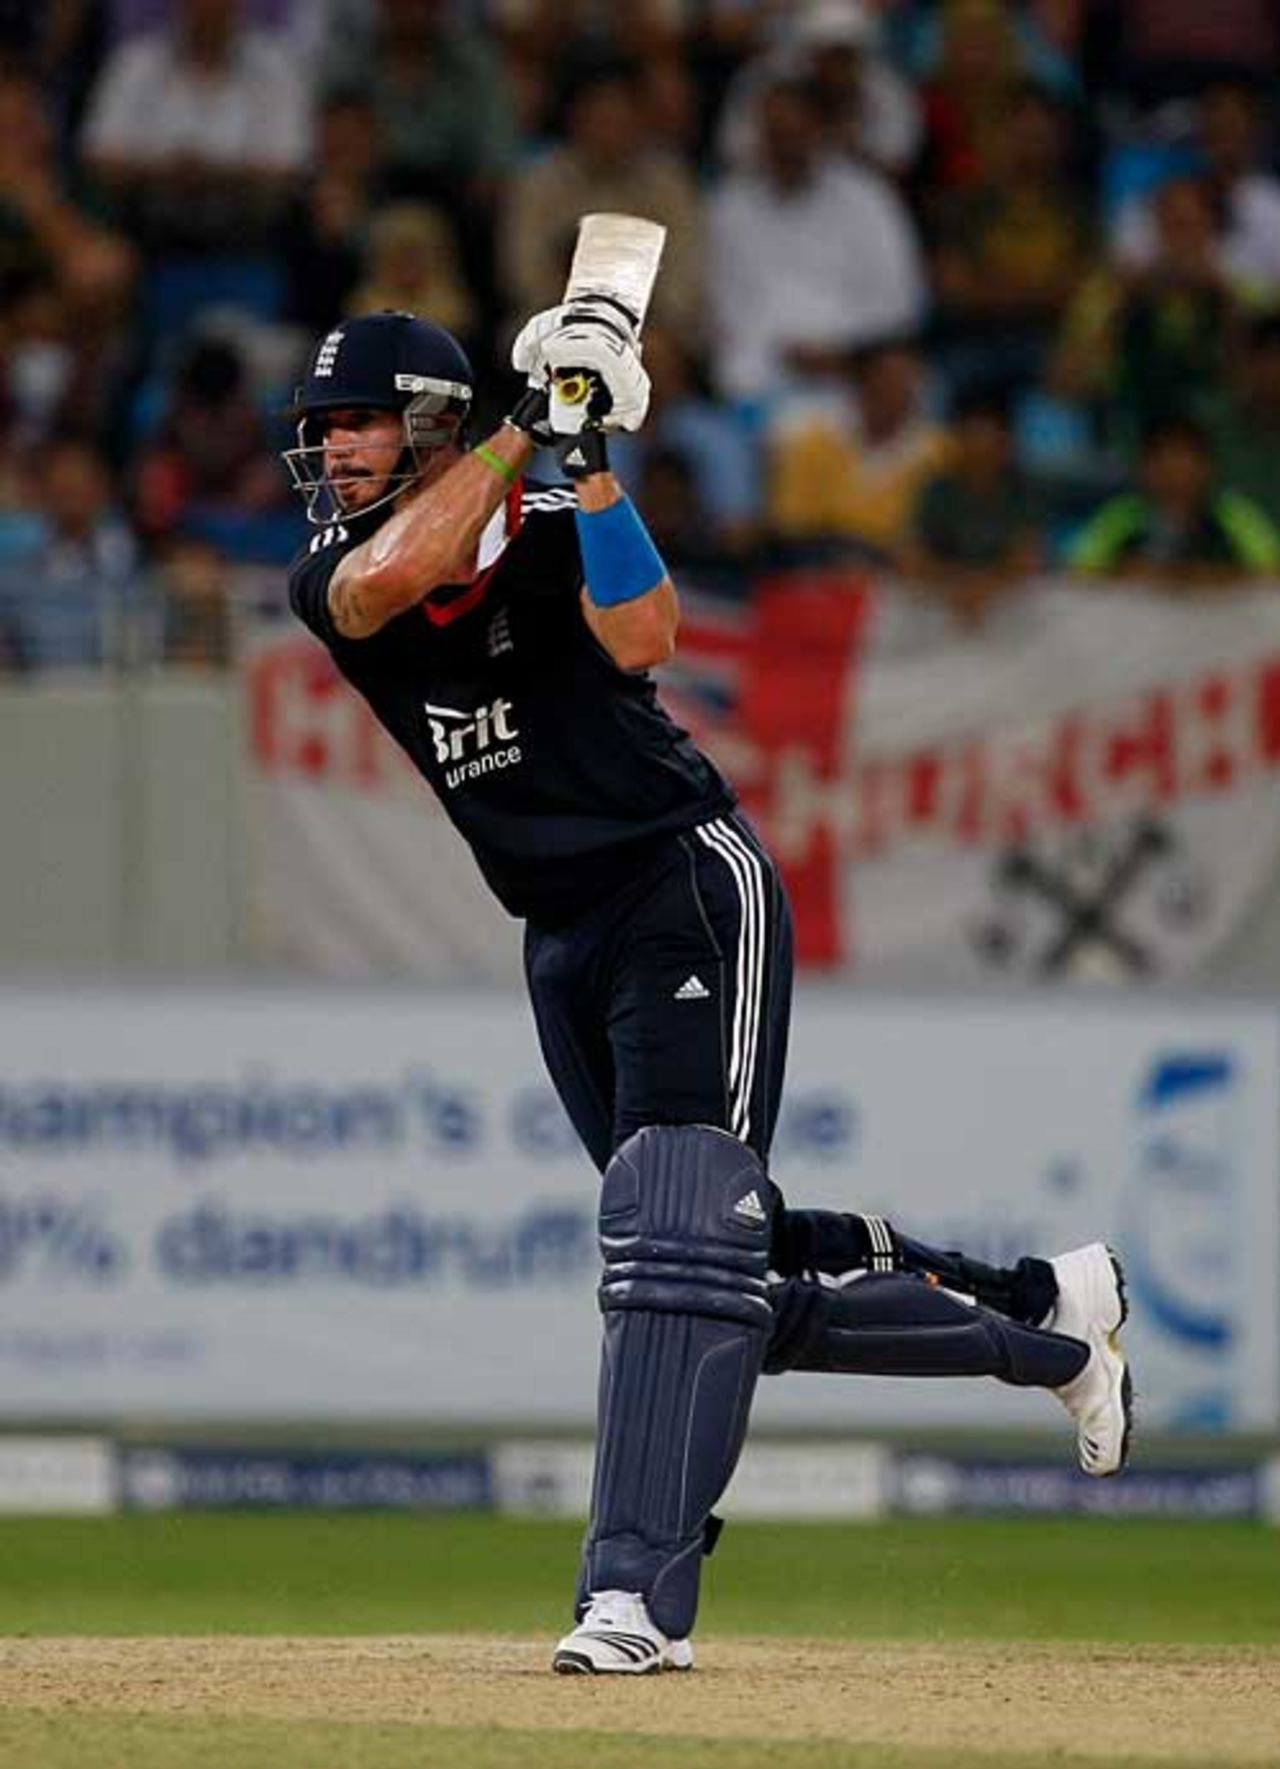 Kevin Pietersen was looking back to his best during his 40-ball 60, England v Pakistan, 2nd Twenty20, Dubai, February 20, 2010